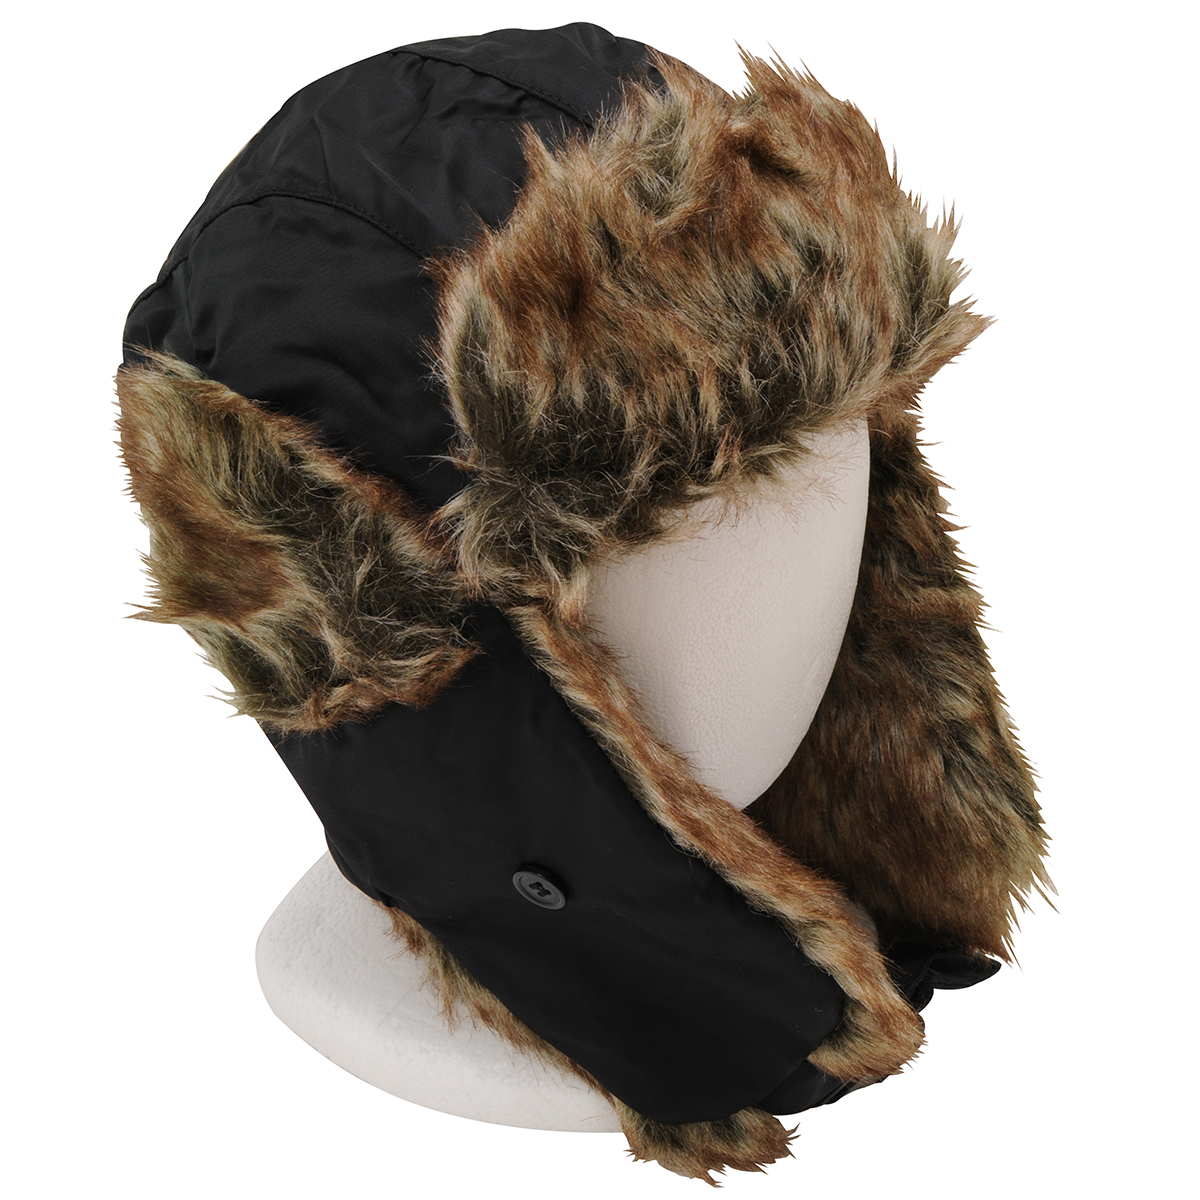 BlackCanyon Outfitters Trooper Hat BCOTHBN - Adult Size Fits Most Faux Fur Bomber Style Winter Cap with Ear Flaps for Men and Wo